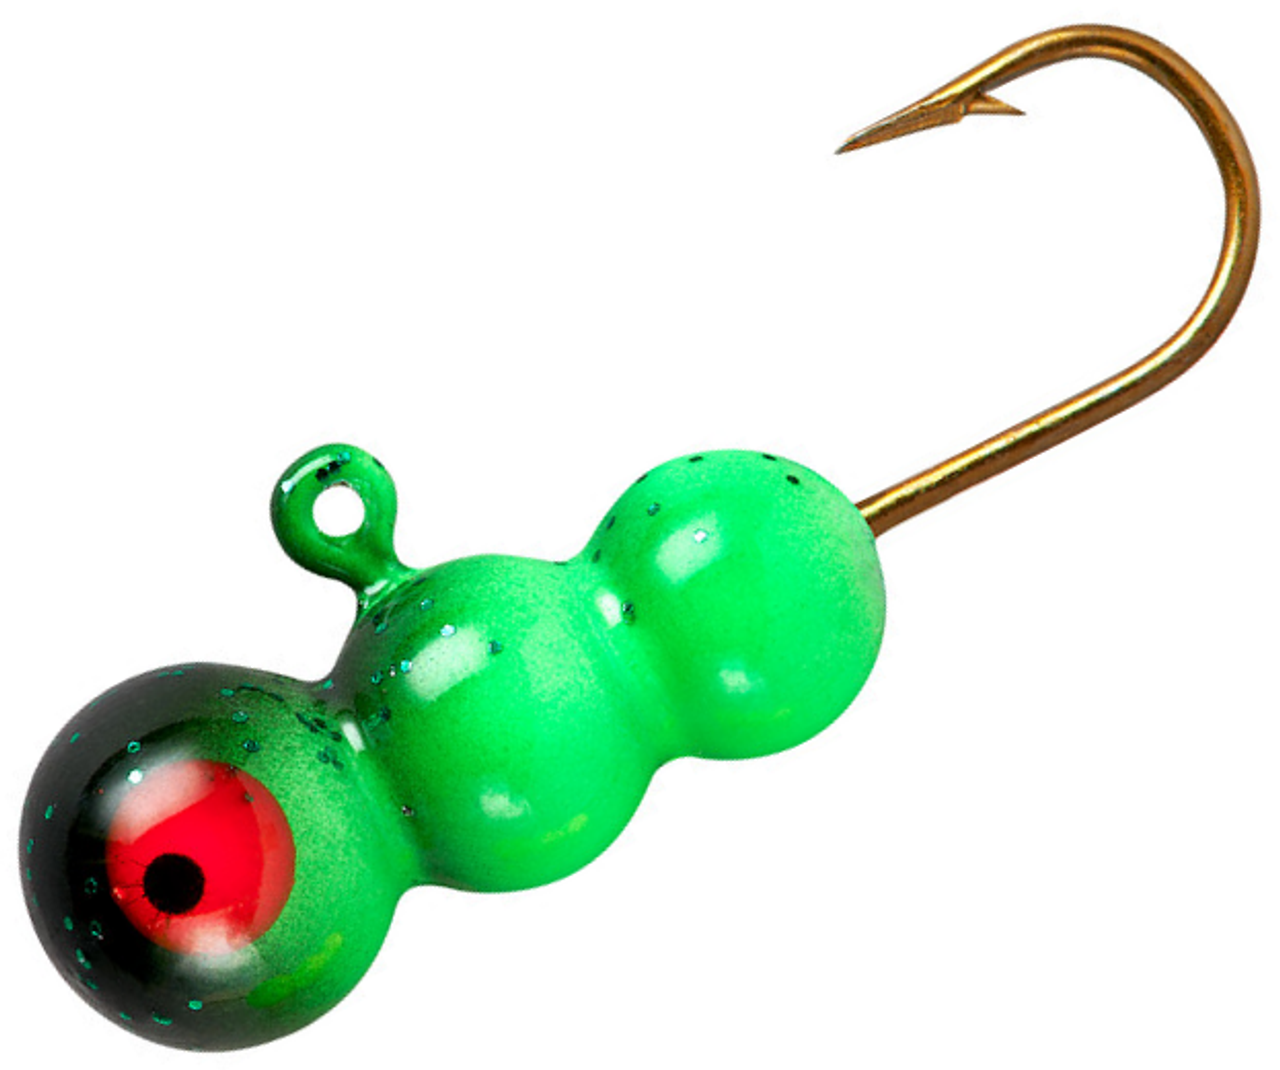 Lindy Ice Worm Fishing Lure Black Chartreuse Green #8 LIW836